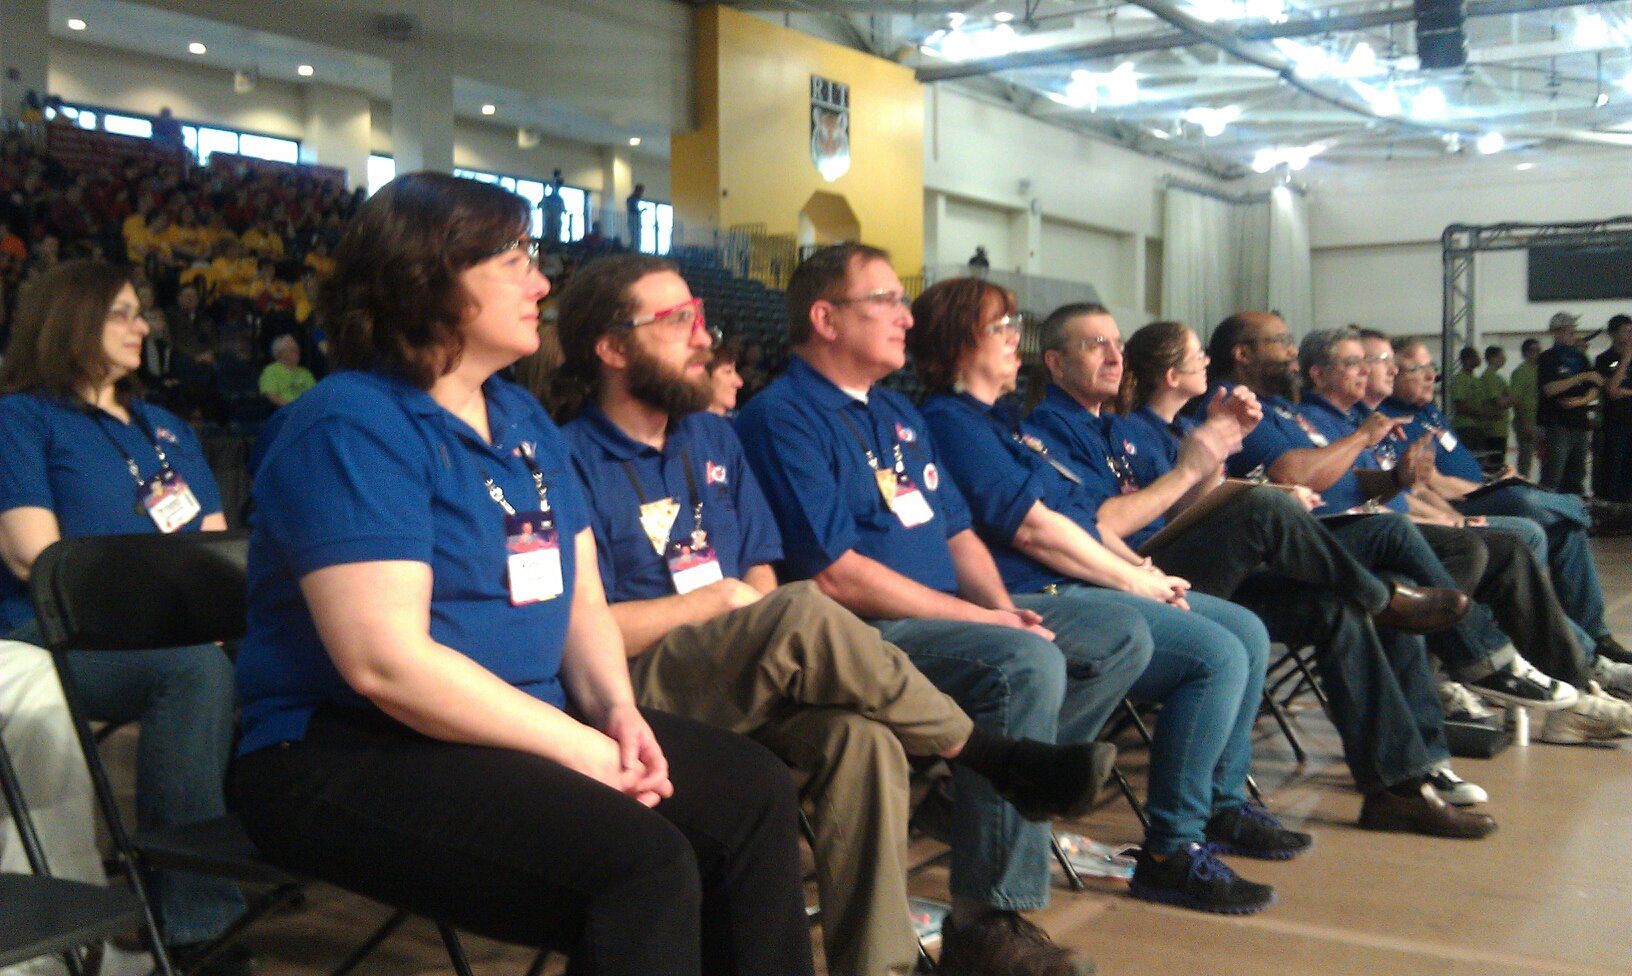 The judges for Rebound Rumble, the 2012 FIRST Robotics Competition at RIT